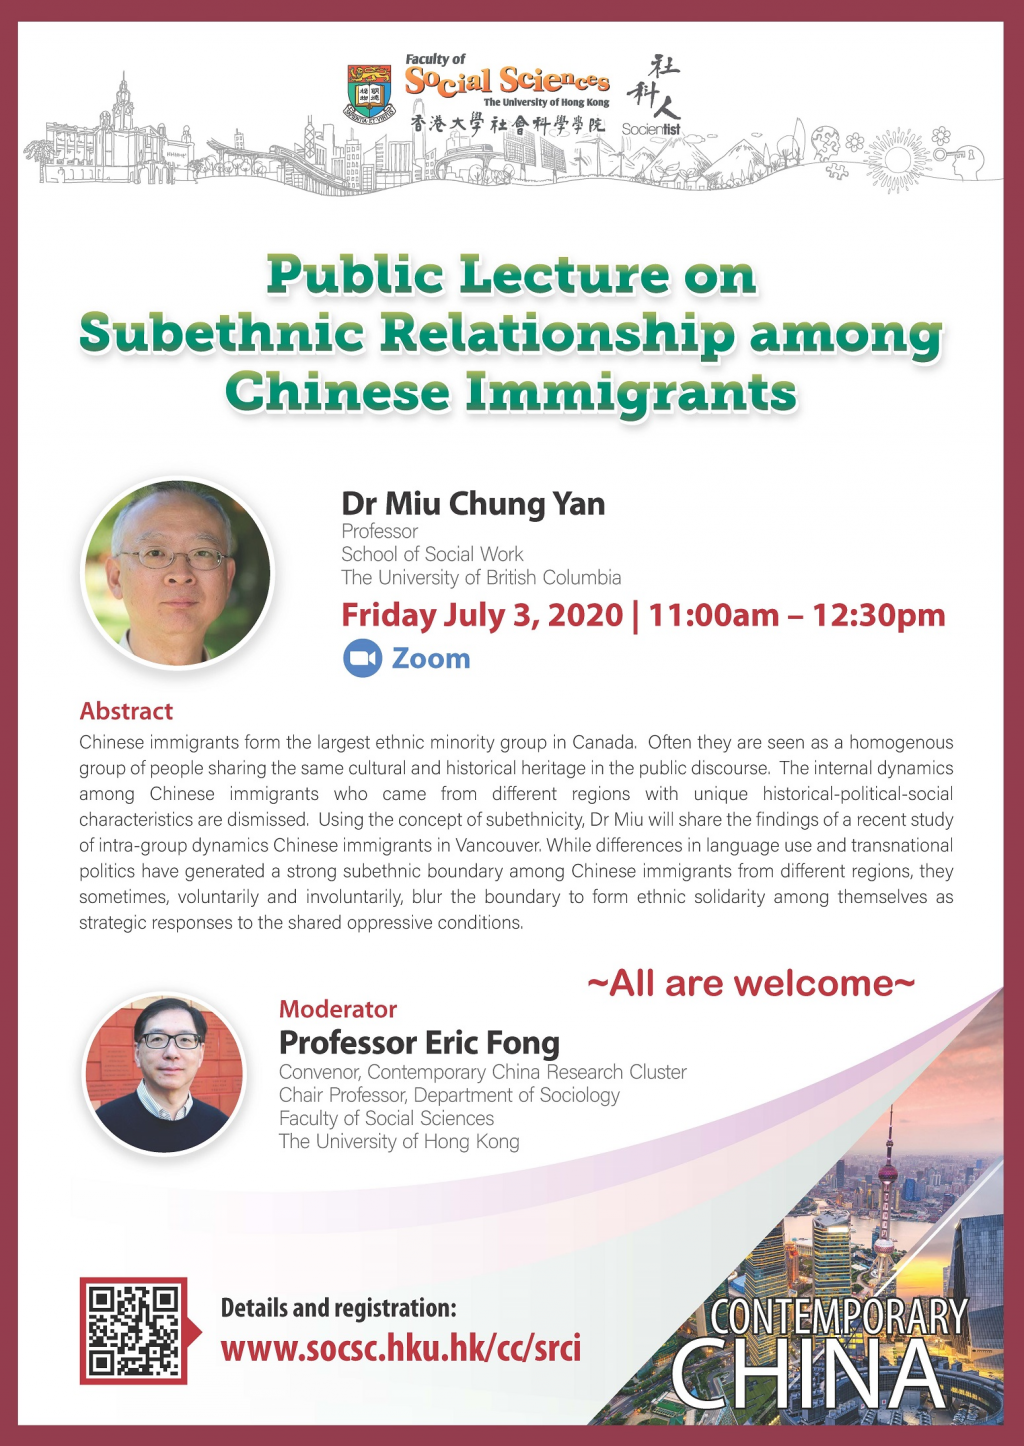 Contemporary China Research Public Lecture on Subethnic Relationship among Chinese Immigrants (July 3, 11am)